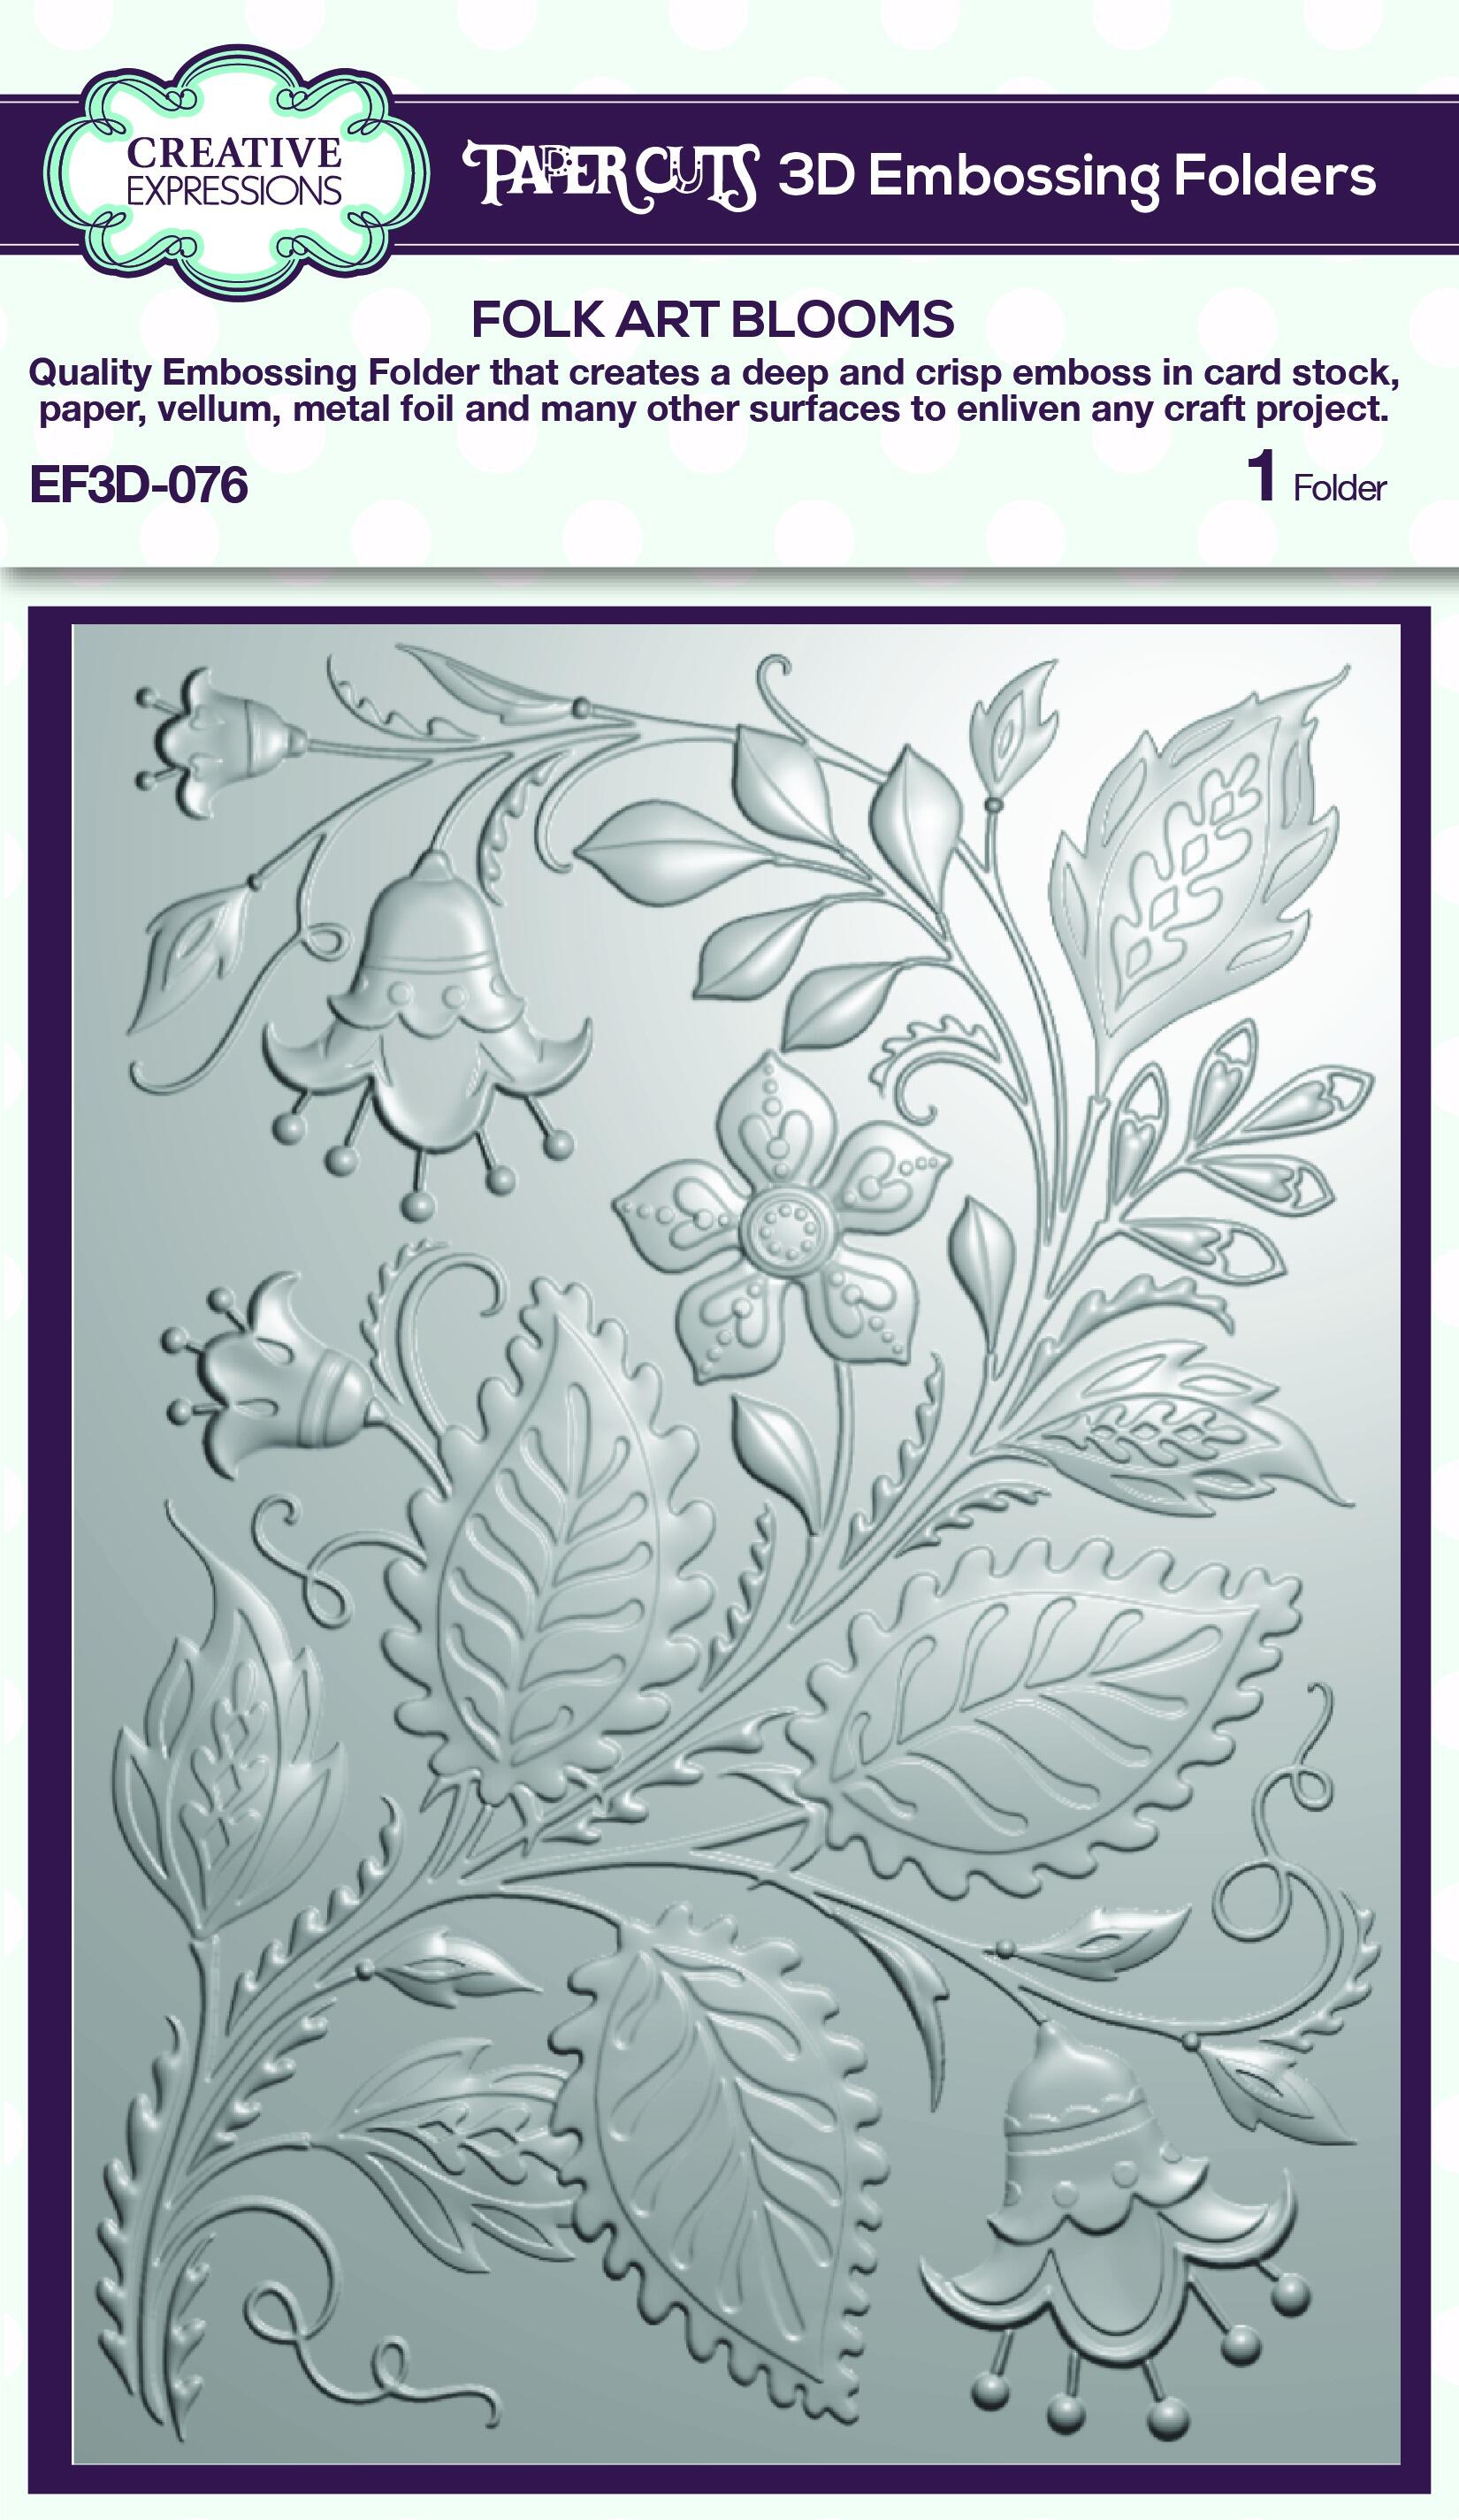 Creative Expressions 5 in x 7 in 3D Embossing Folder - Folk Art Blooms  EF3D-076